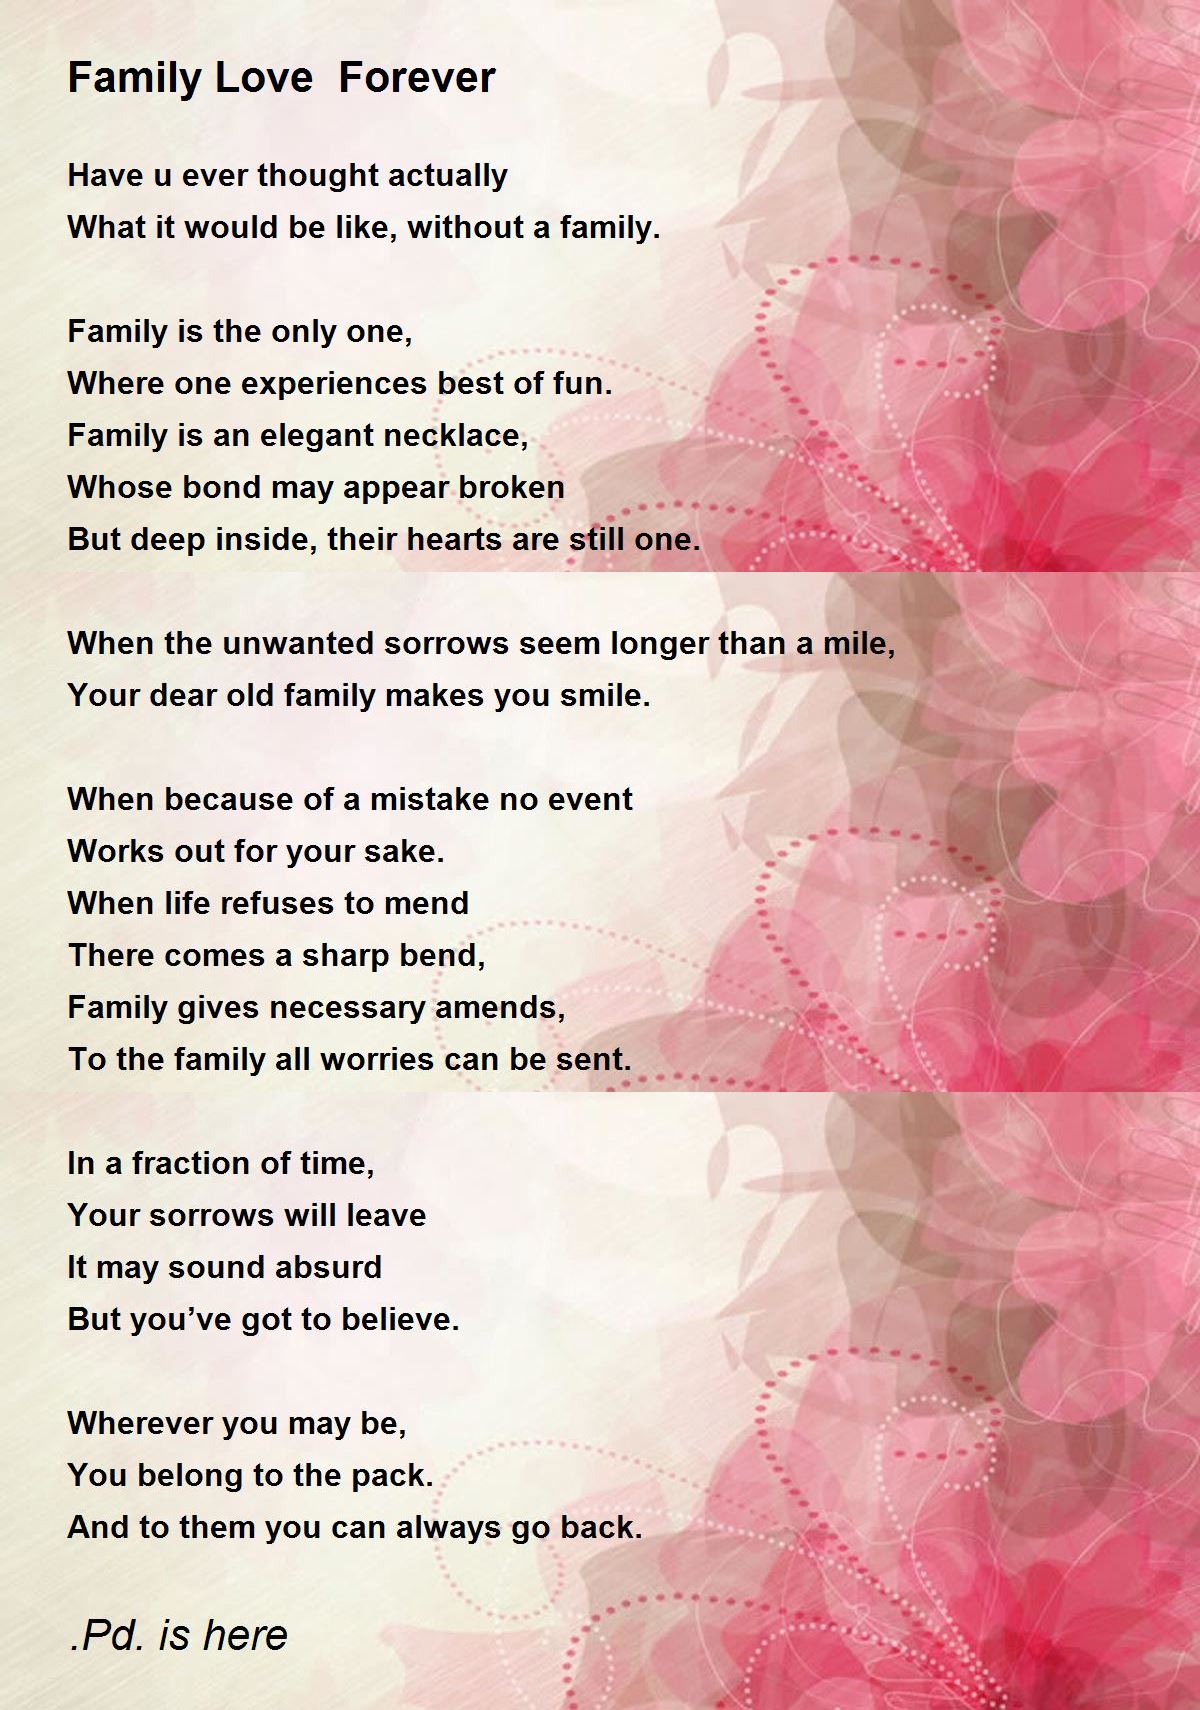 Family Love Forever Poem by .Pd. is here - Poem Hunter